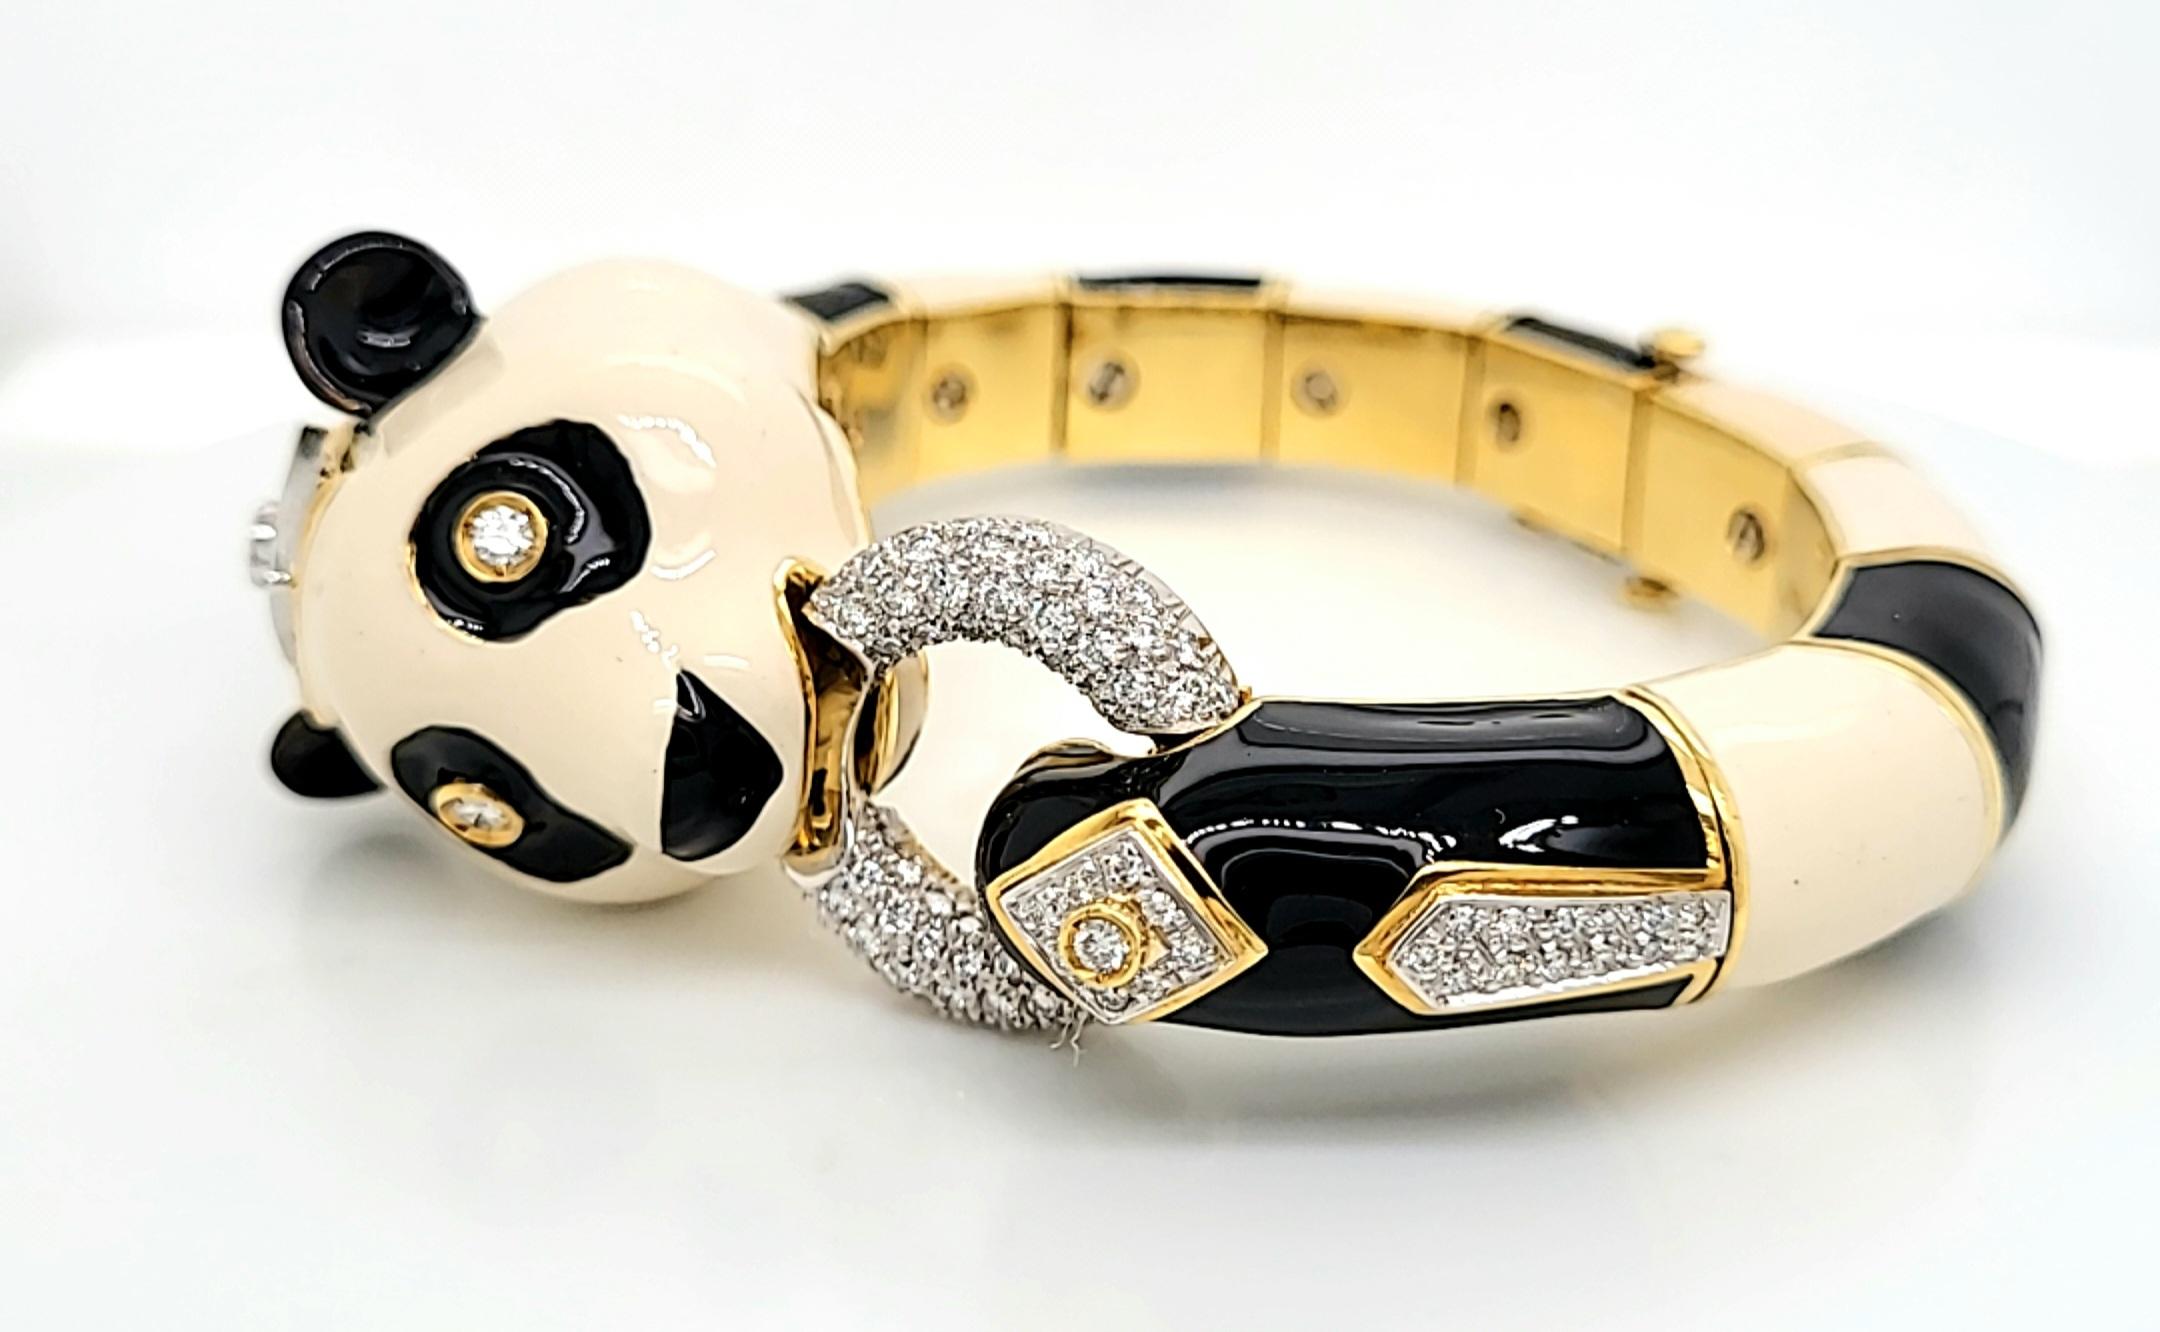 This one of a kind and unique bracelet from David Webb is designed as a panda. It features black and white enamel accented by 1.60 carat total weight in diamonds set in 18 karat yellow gold and platinum. Make a statement with this fun and vintage